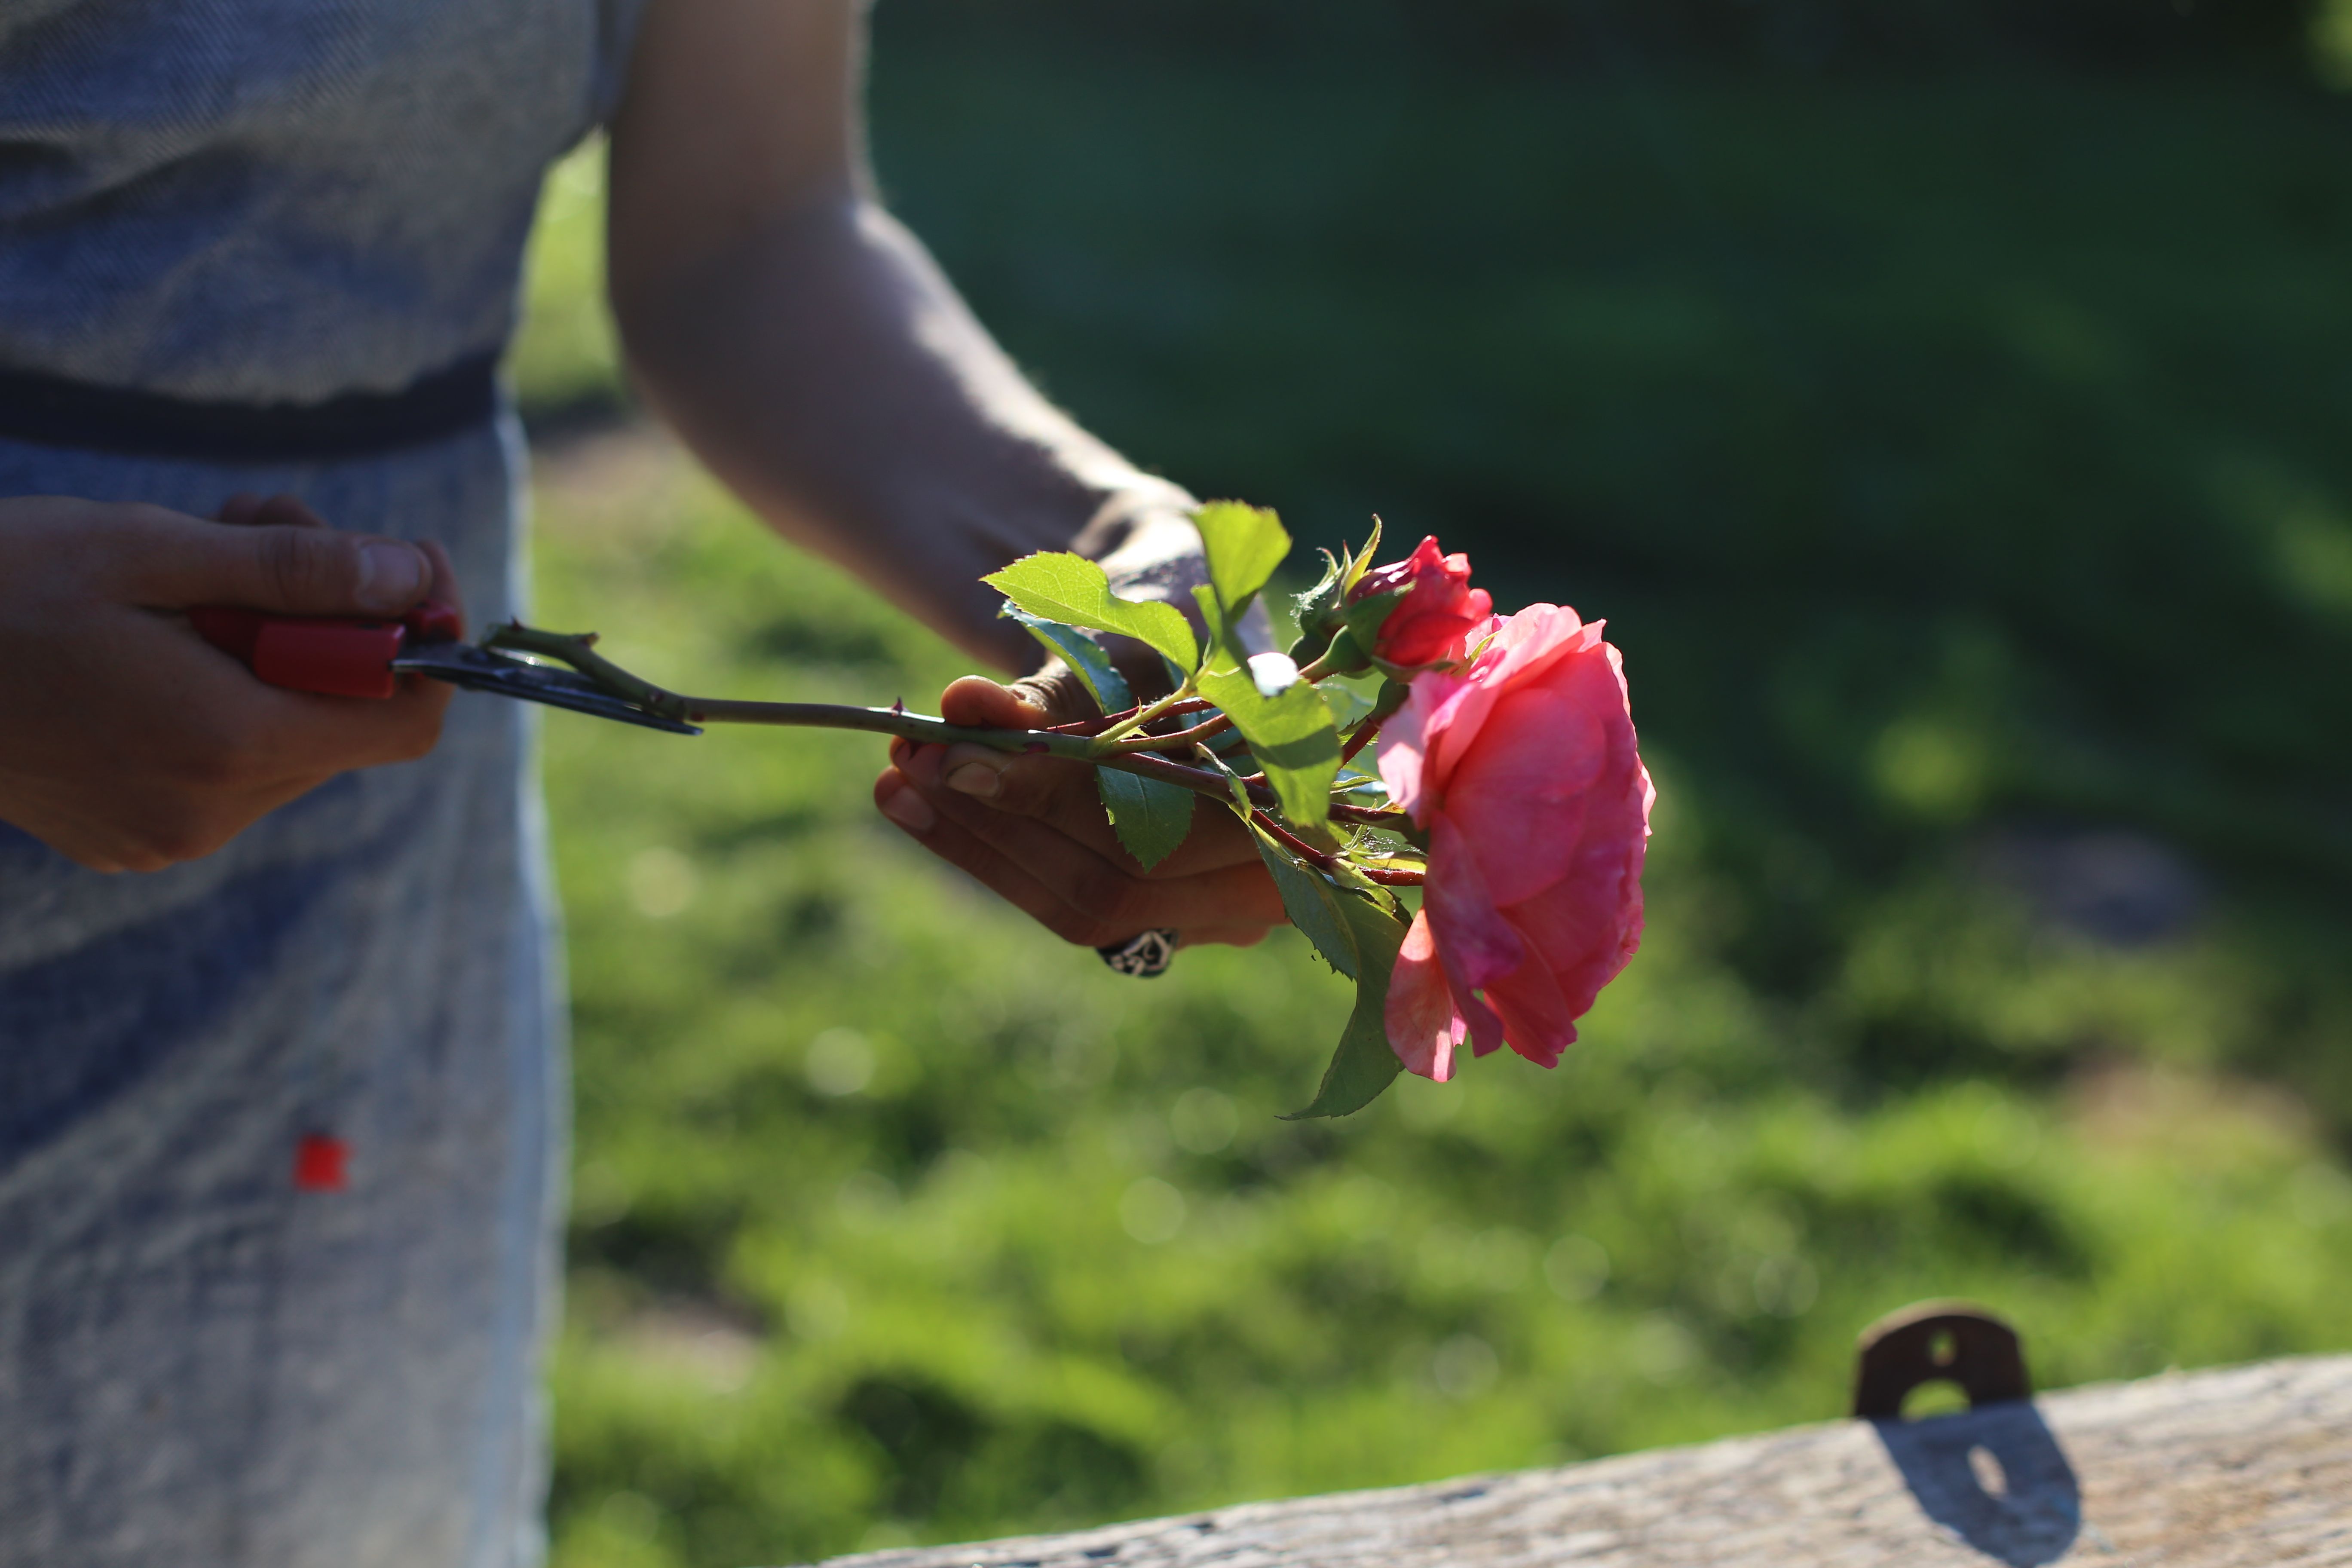 Removing thorns from a rose